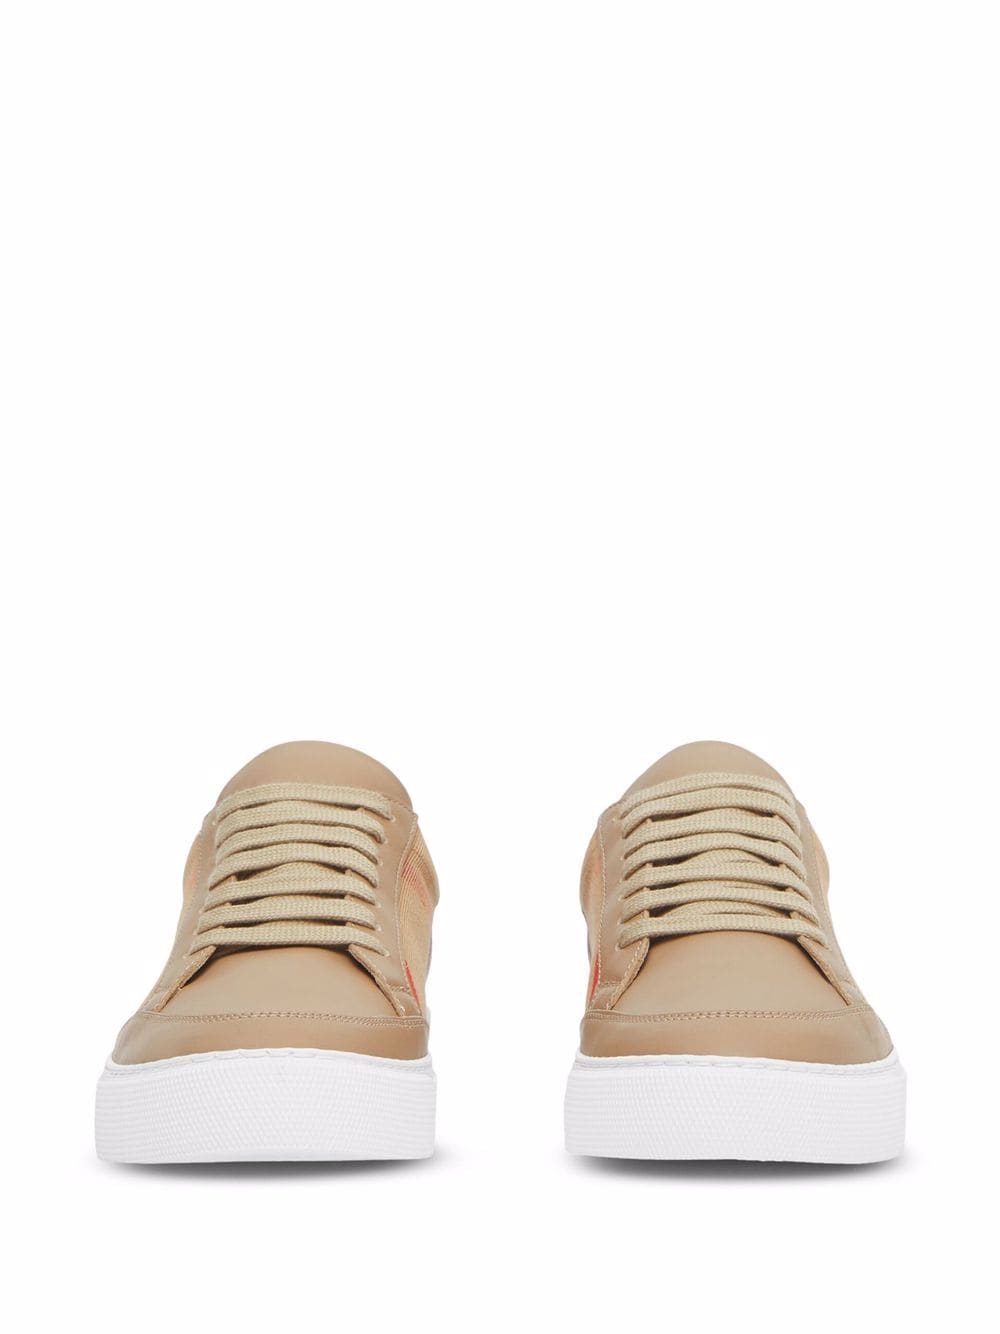 Burberry House Check low-top Sneakers - Farfetch